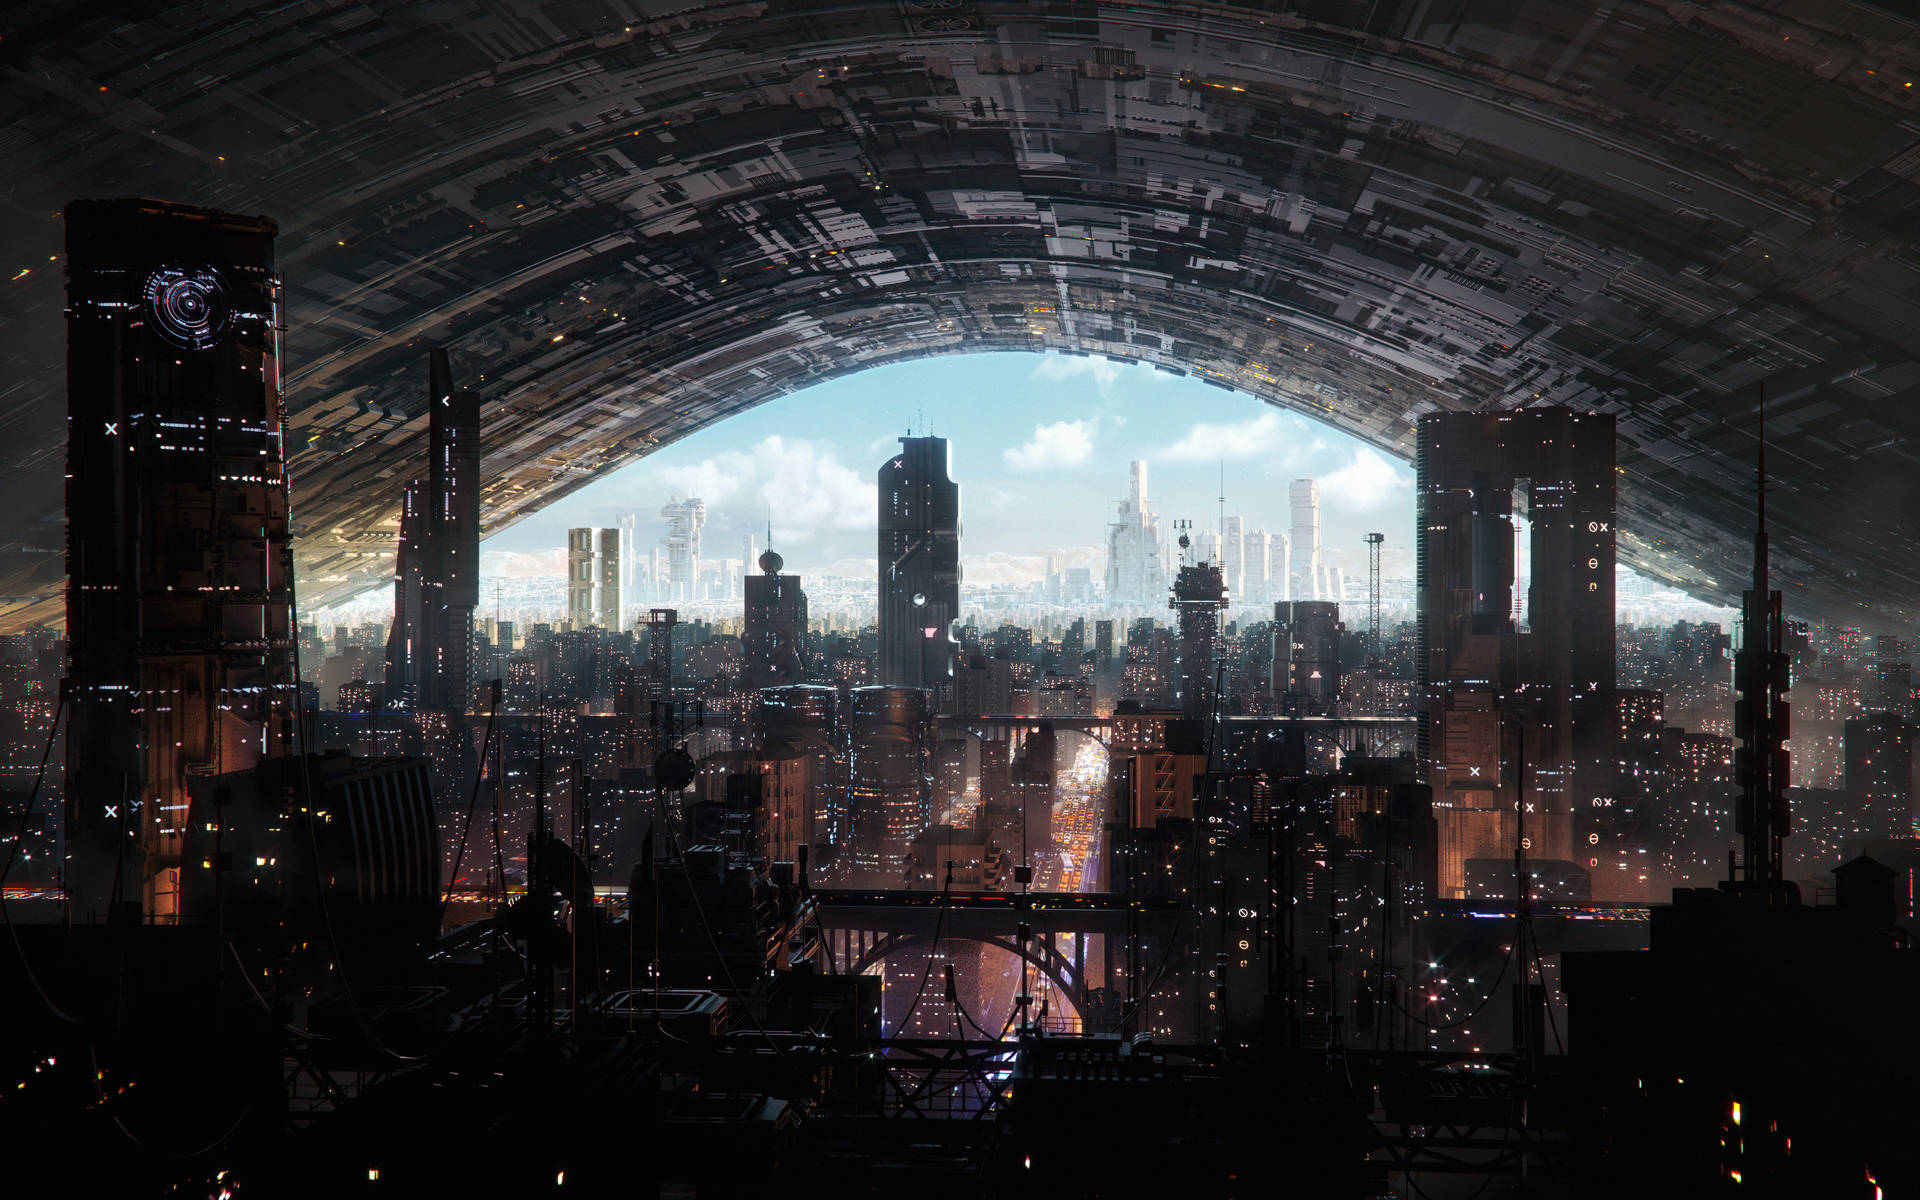 Futuristic City With A Dome In The Background Wallpaper